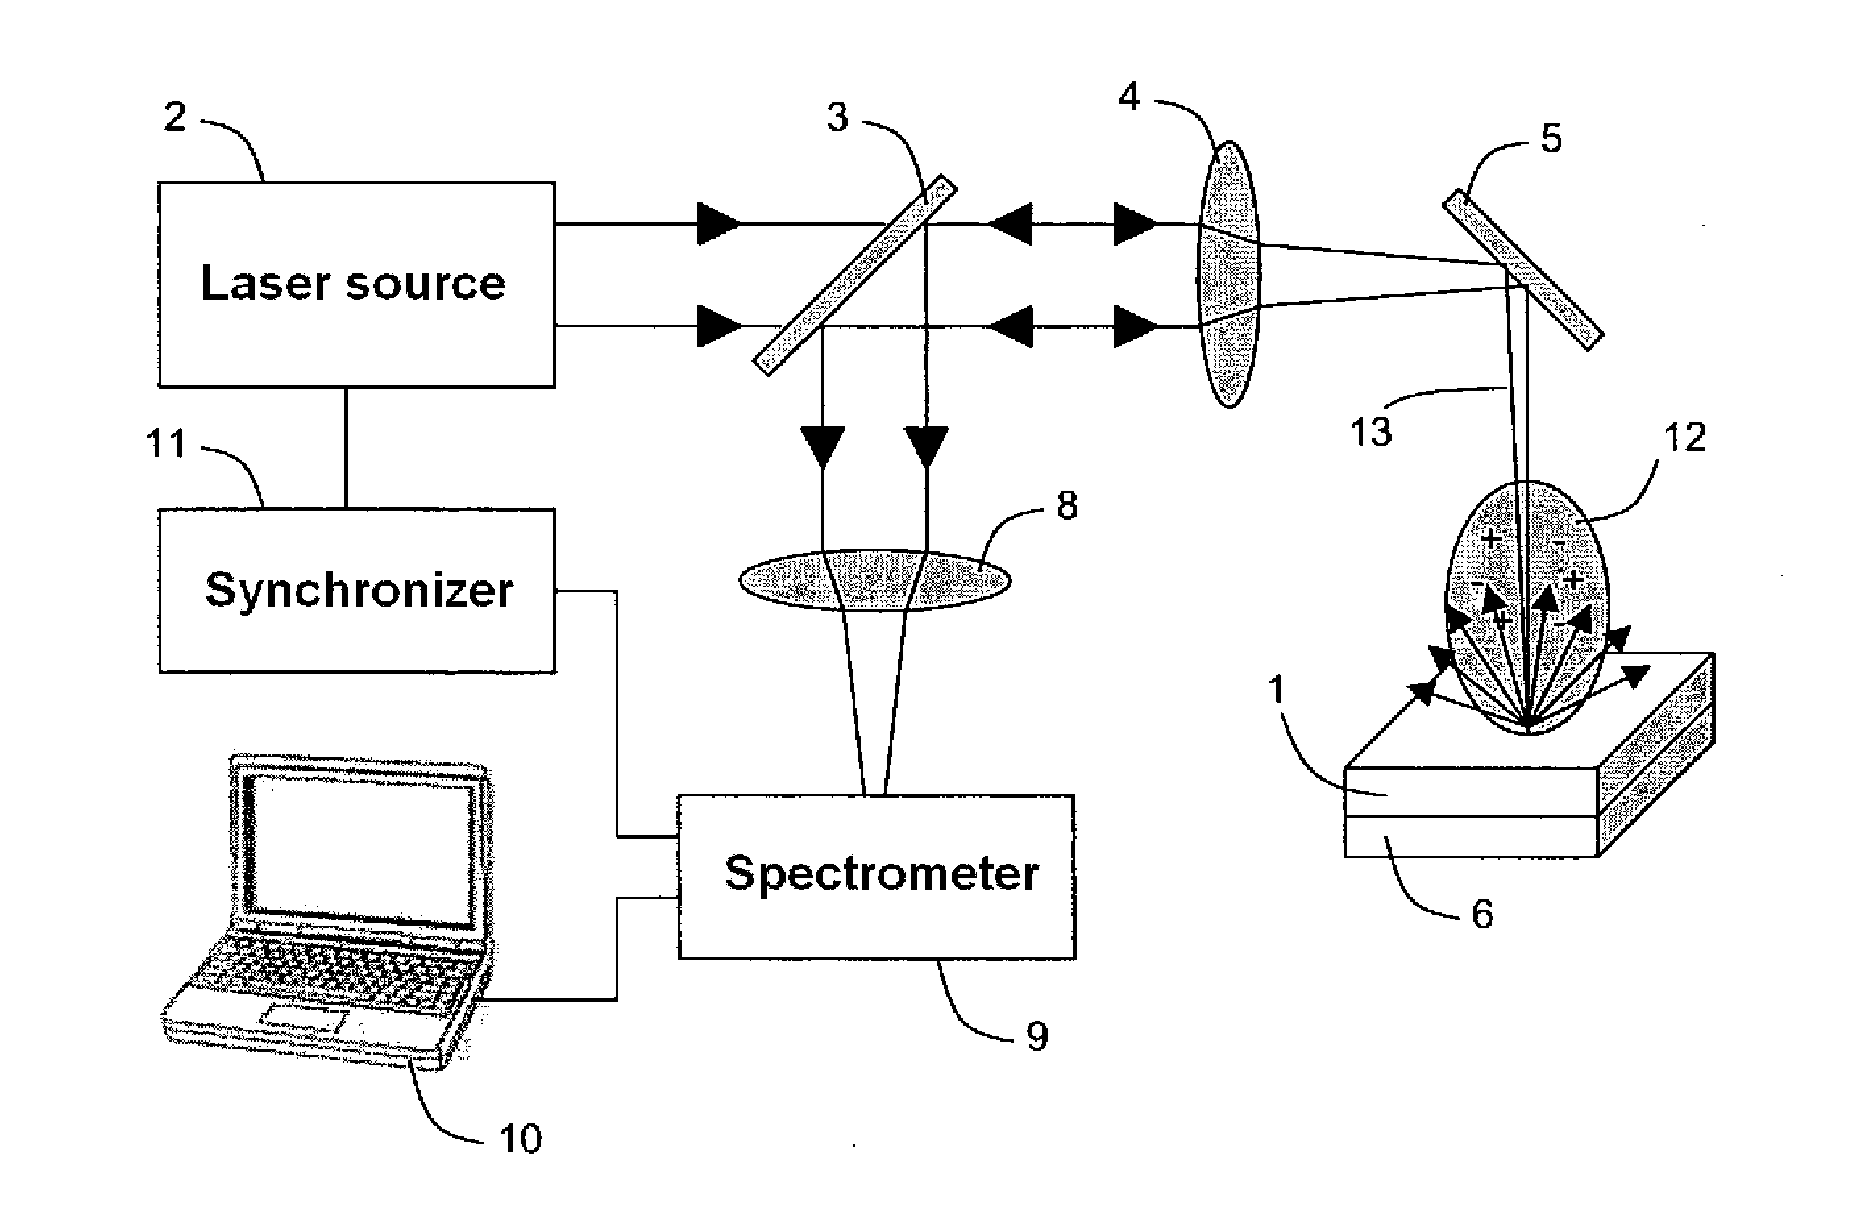 System and method for quantitative analysis of the elemental composition of a material by laser-induced breakdown spectroscopy (LIBS)